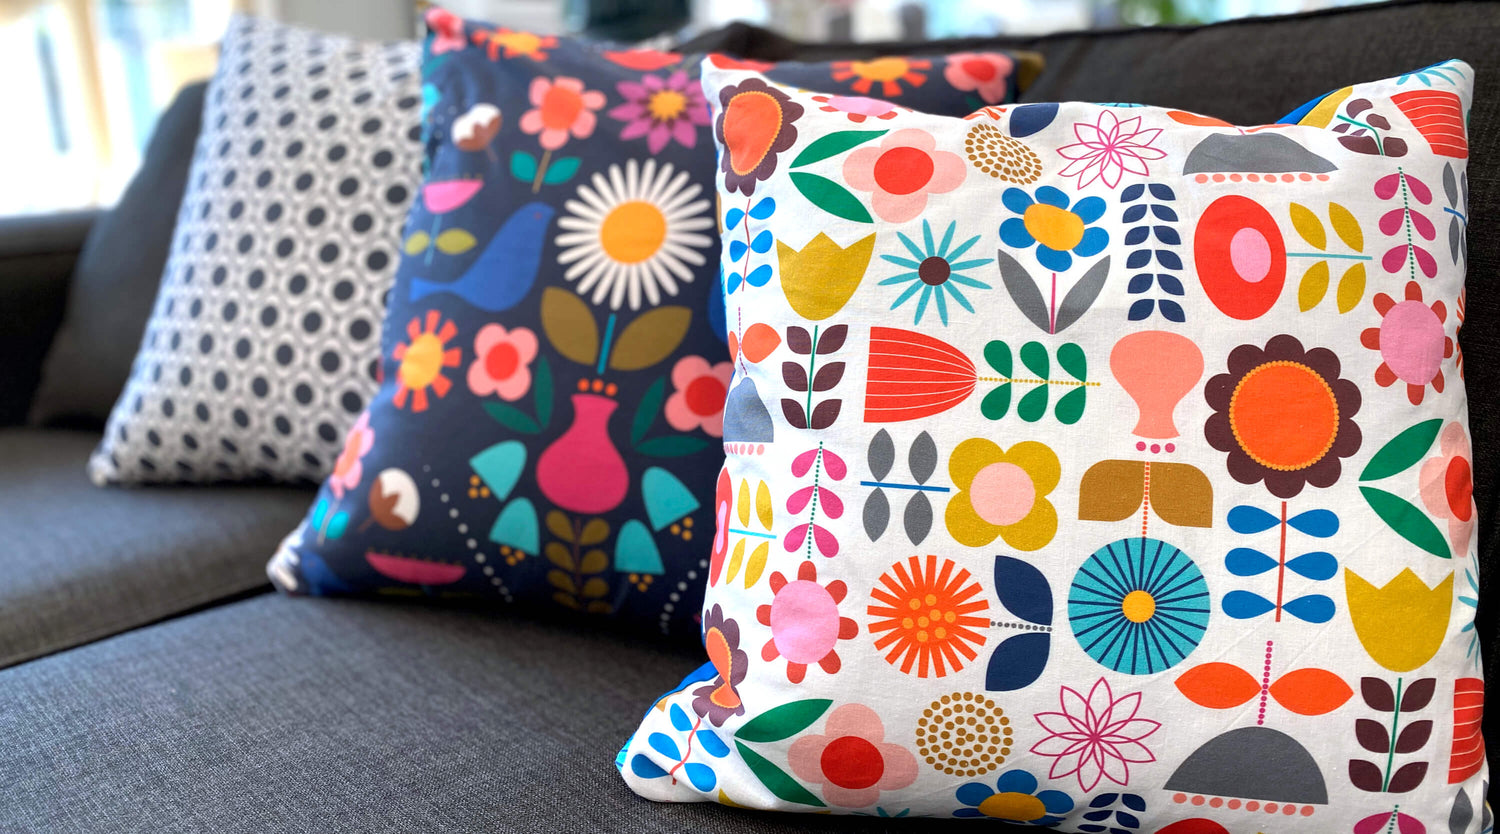 Hand sewn Floral Scandinavian themed cushion covers with bright colours